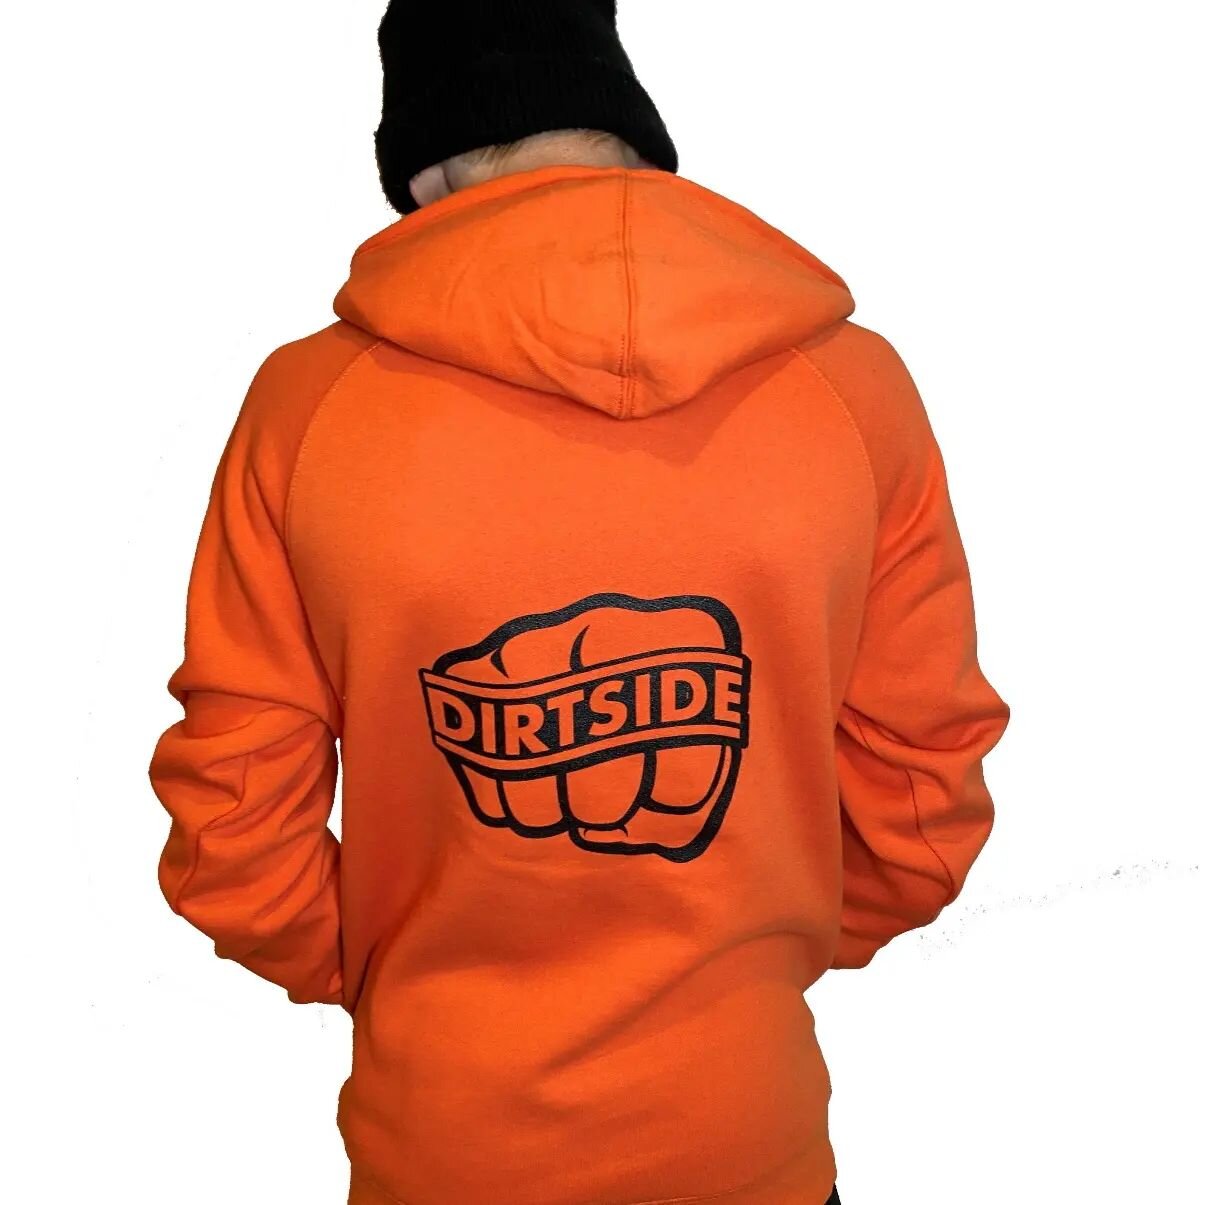 Want a warm layer for riding or just want to look steezy out and about? Get yourself a Dirtside hoodie!

A few colours available. 

Link in bio.

#dirtside
#teamdirtside
#fistbumpsforever
#mtb
#mtblife
#hoodie
#lifebehindbars
#mtblove
#downhillmtb
#m